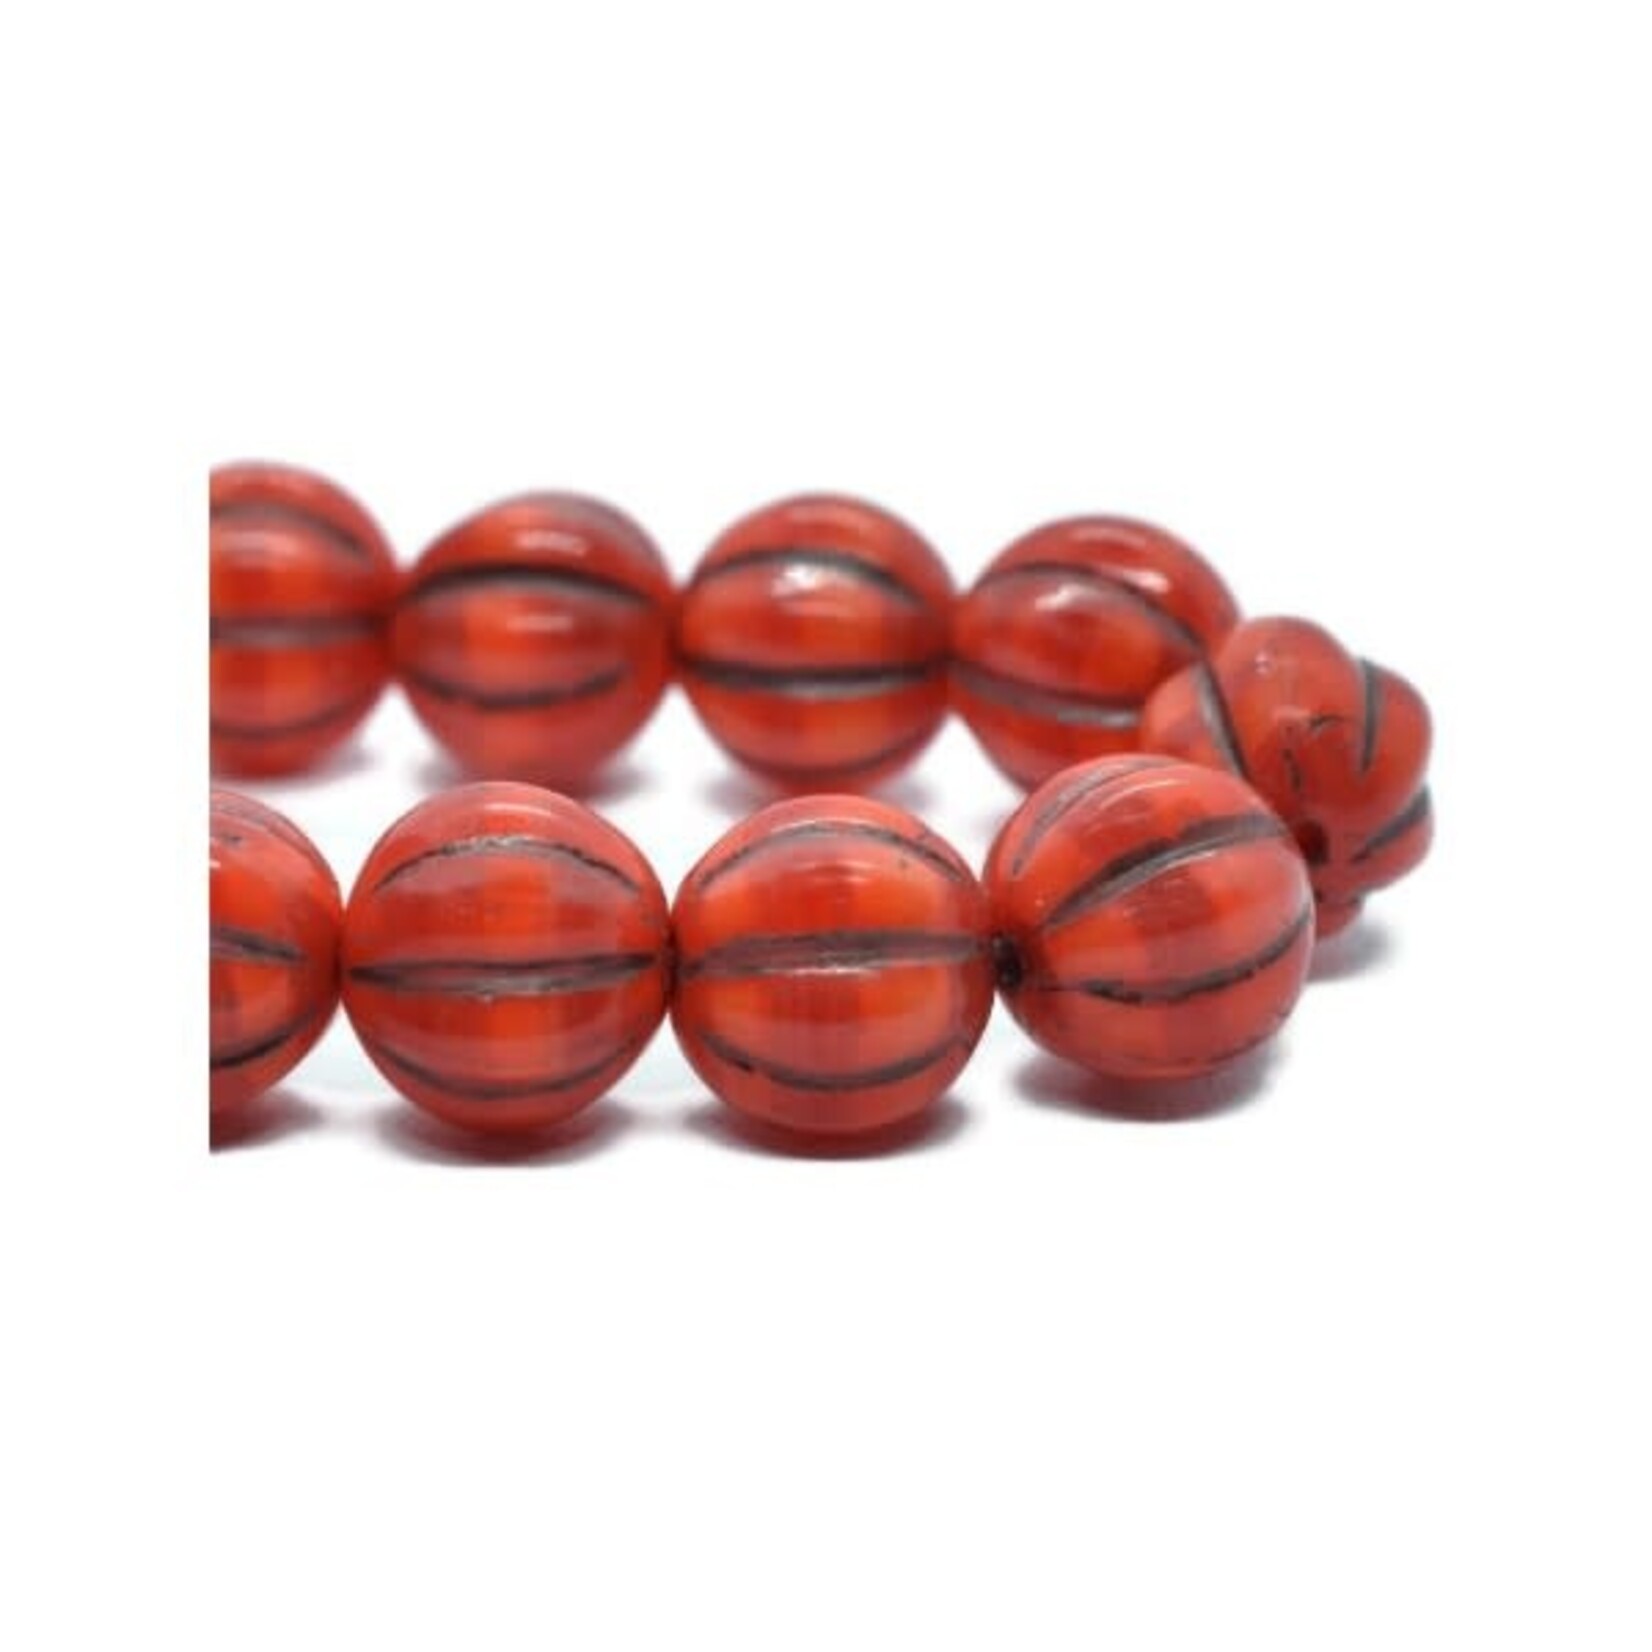 Melon 8mm Ladybug Red and White with Brown Wash